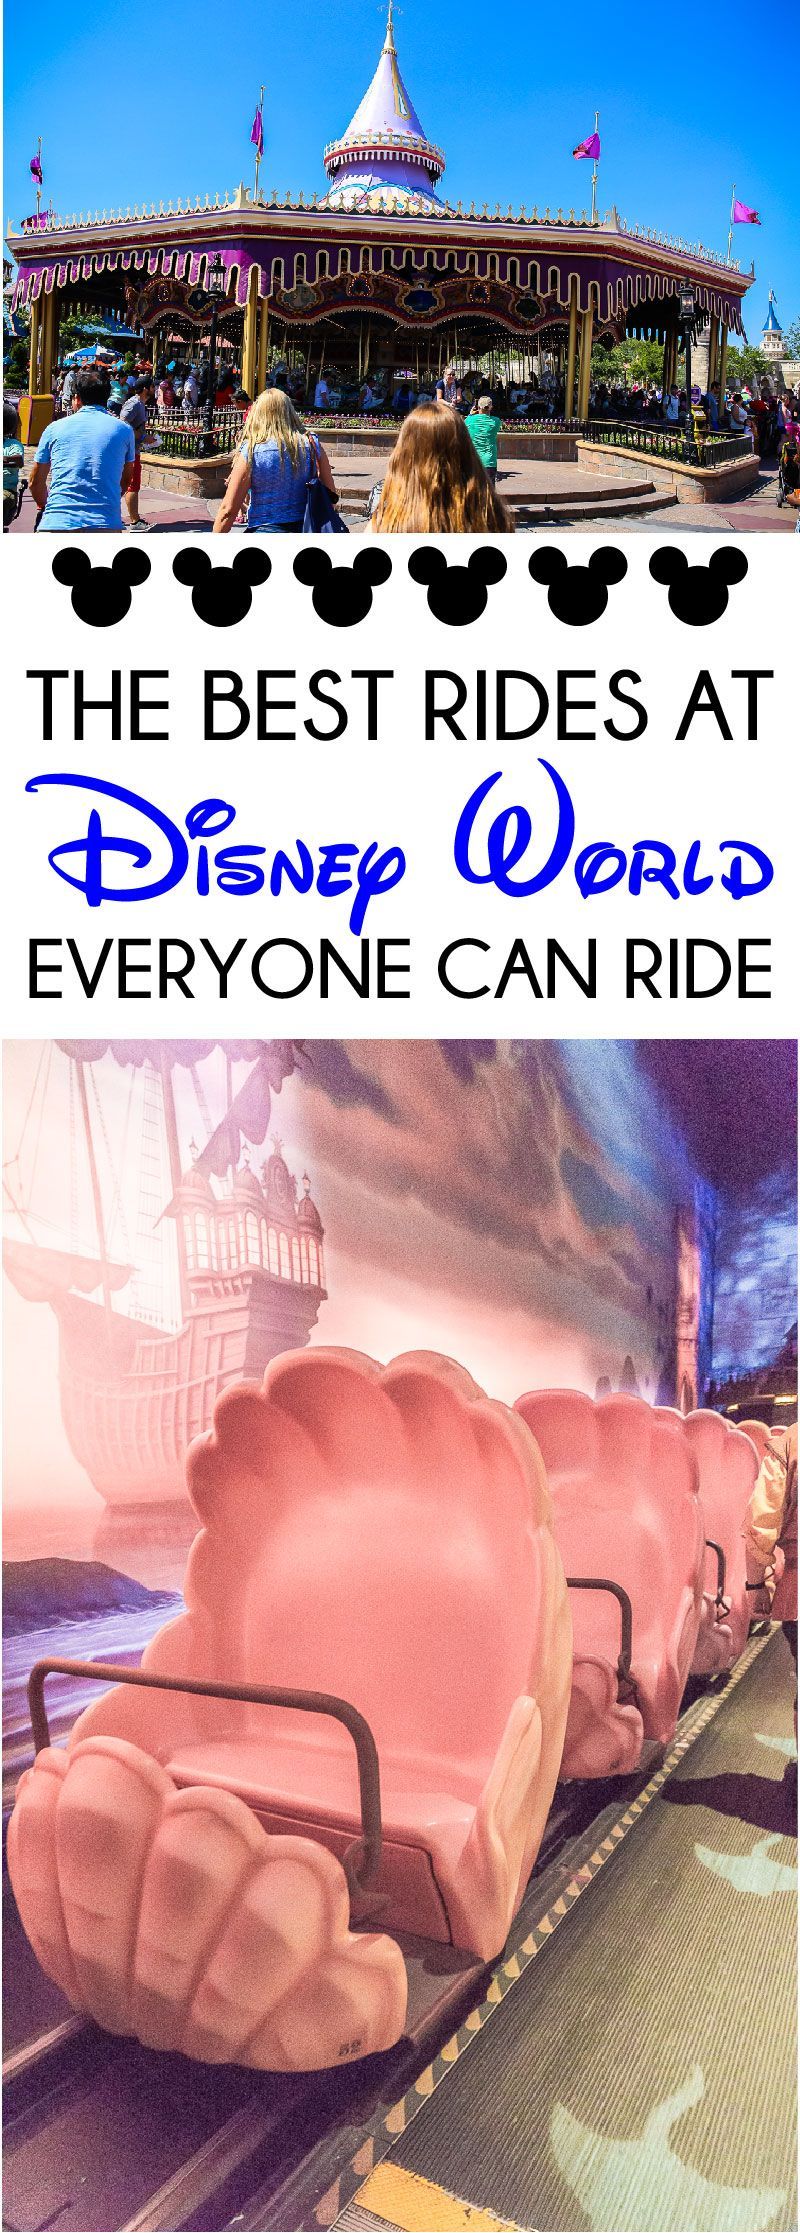 The Best Disney World Rides for All Ages -   Disney World Tips and Hacks Collection